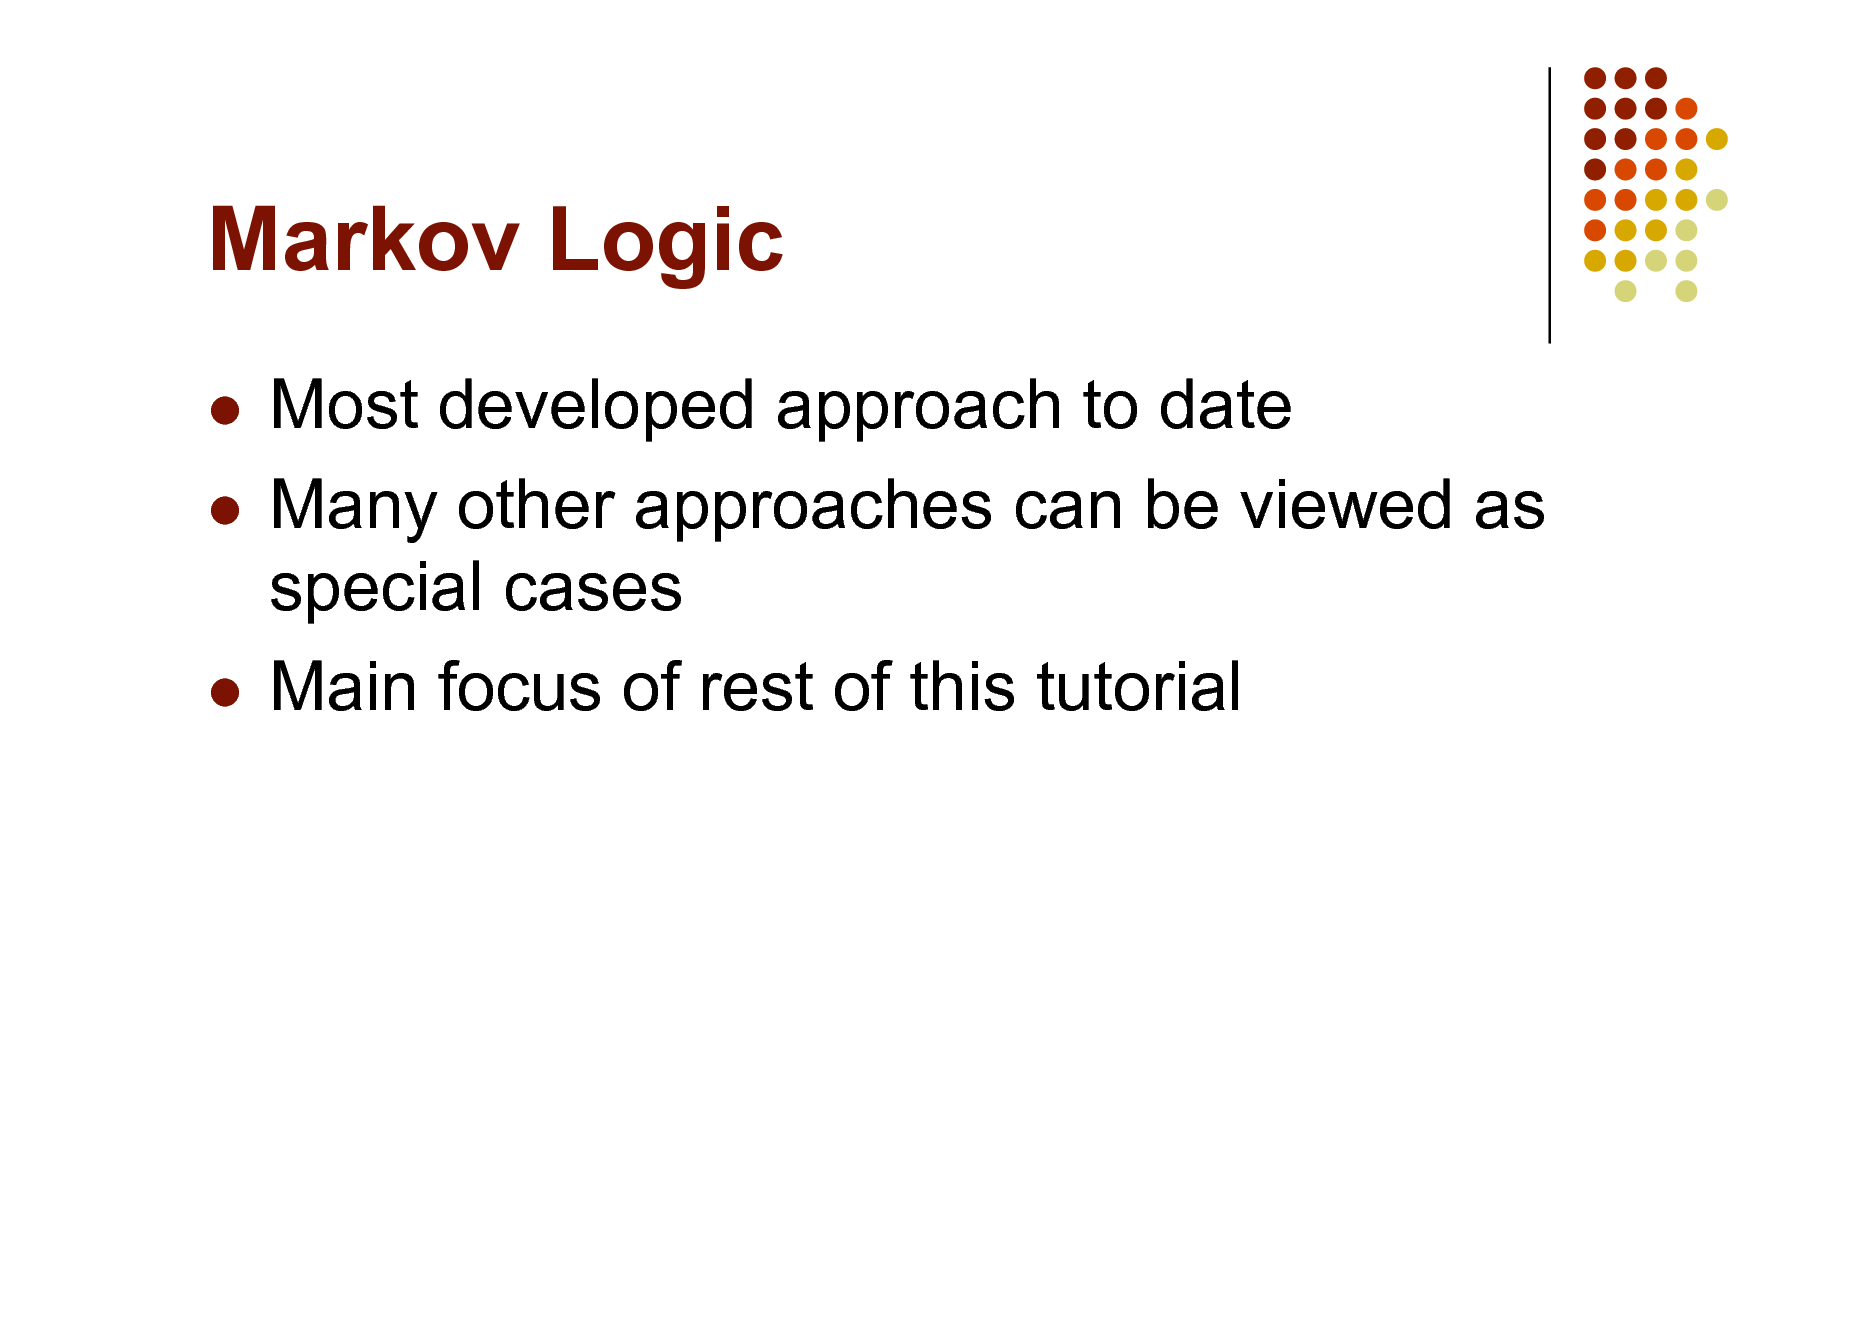 Slide: Markov Logic
Most developed approach to date  Many other approaches can be viewed as special cases  Main focus of rest of this tutorial


